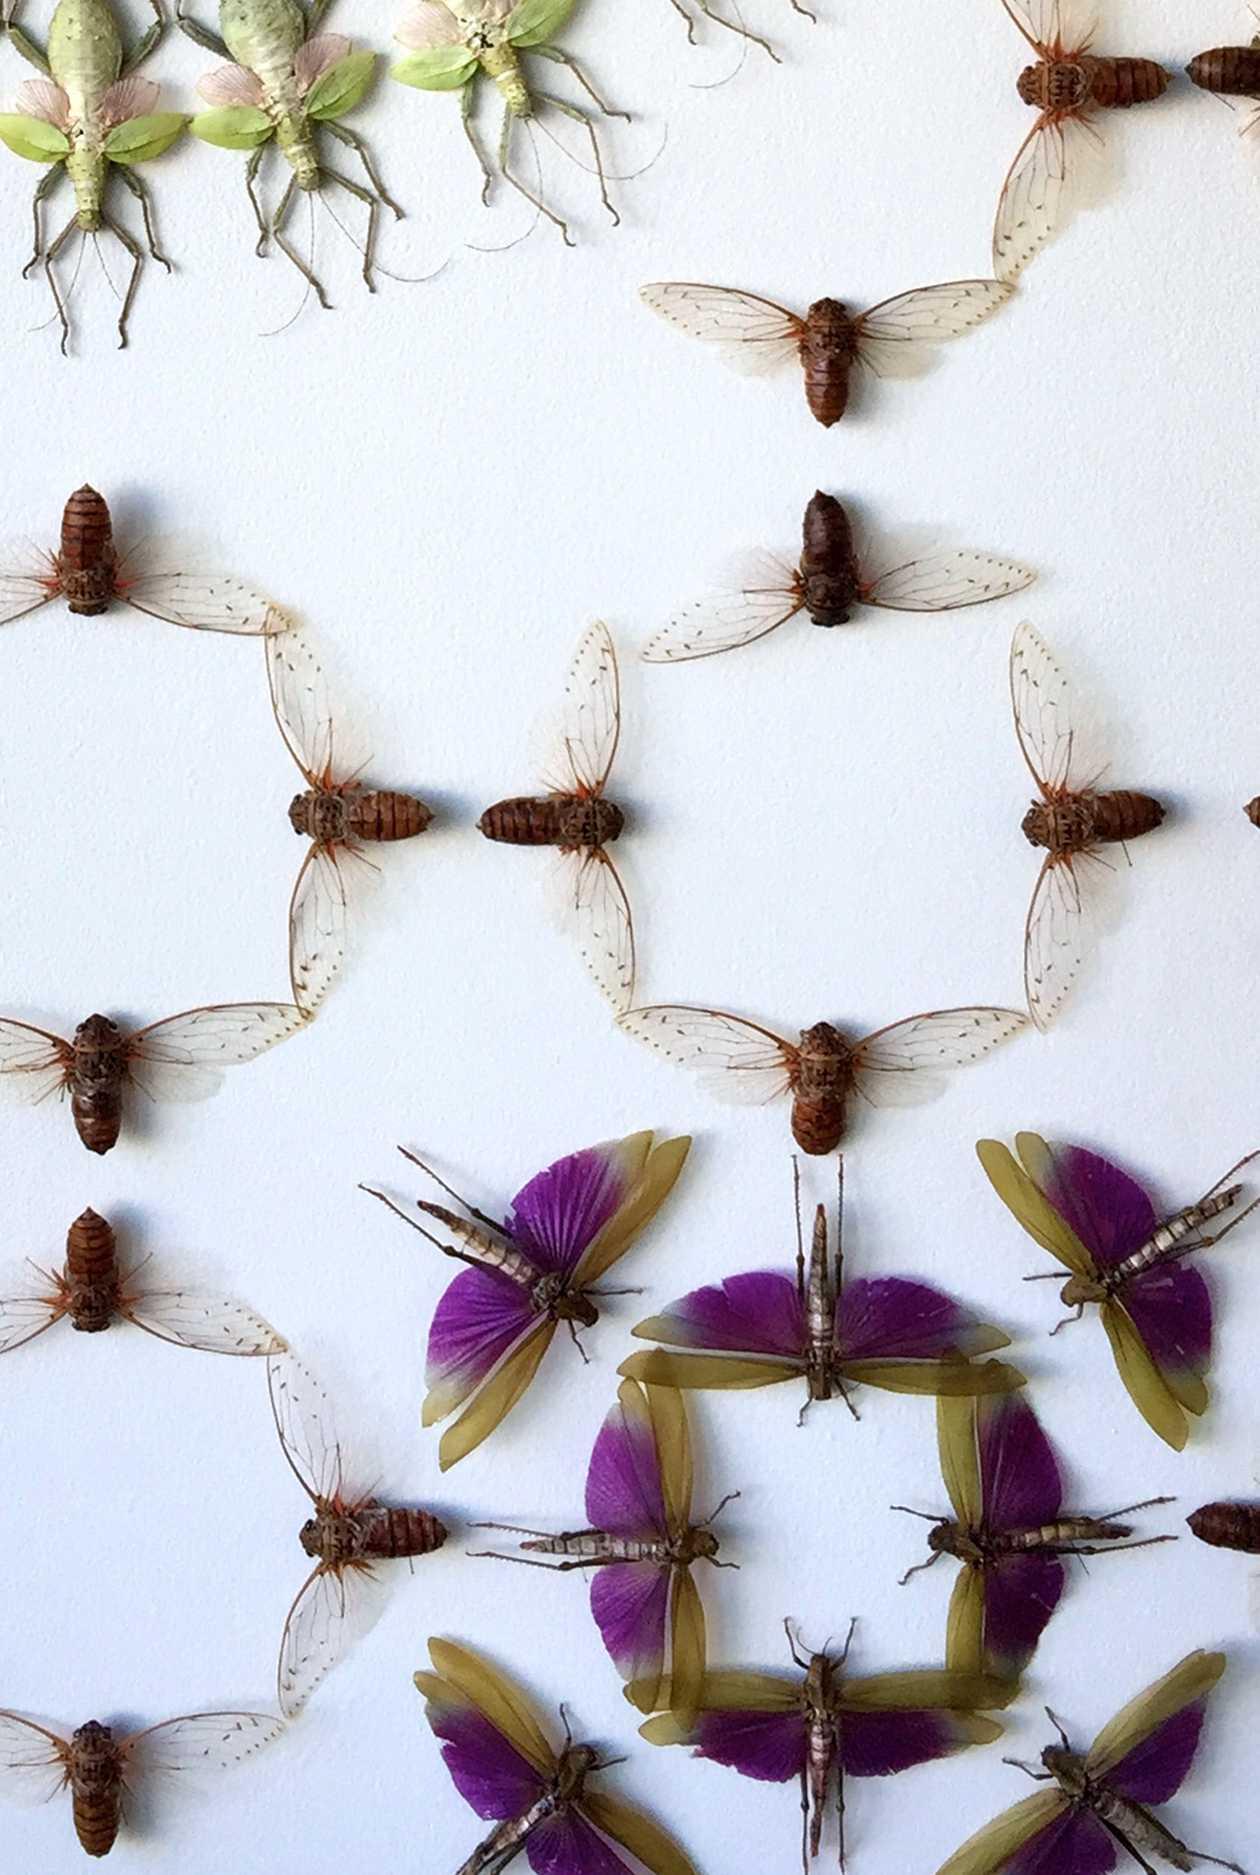 Large, colorful insects arranged on a wall in geometric patterns to mimic wallpaper